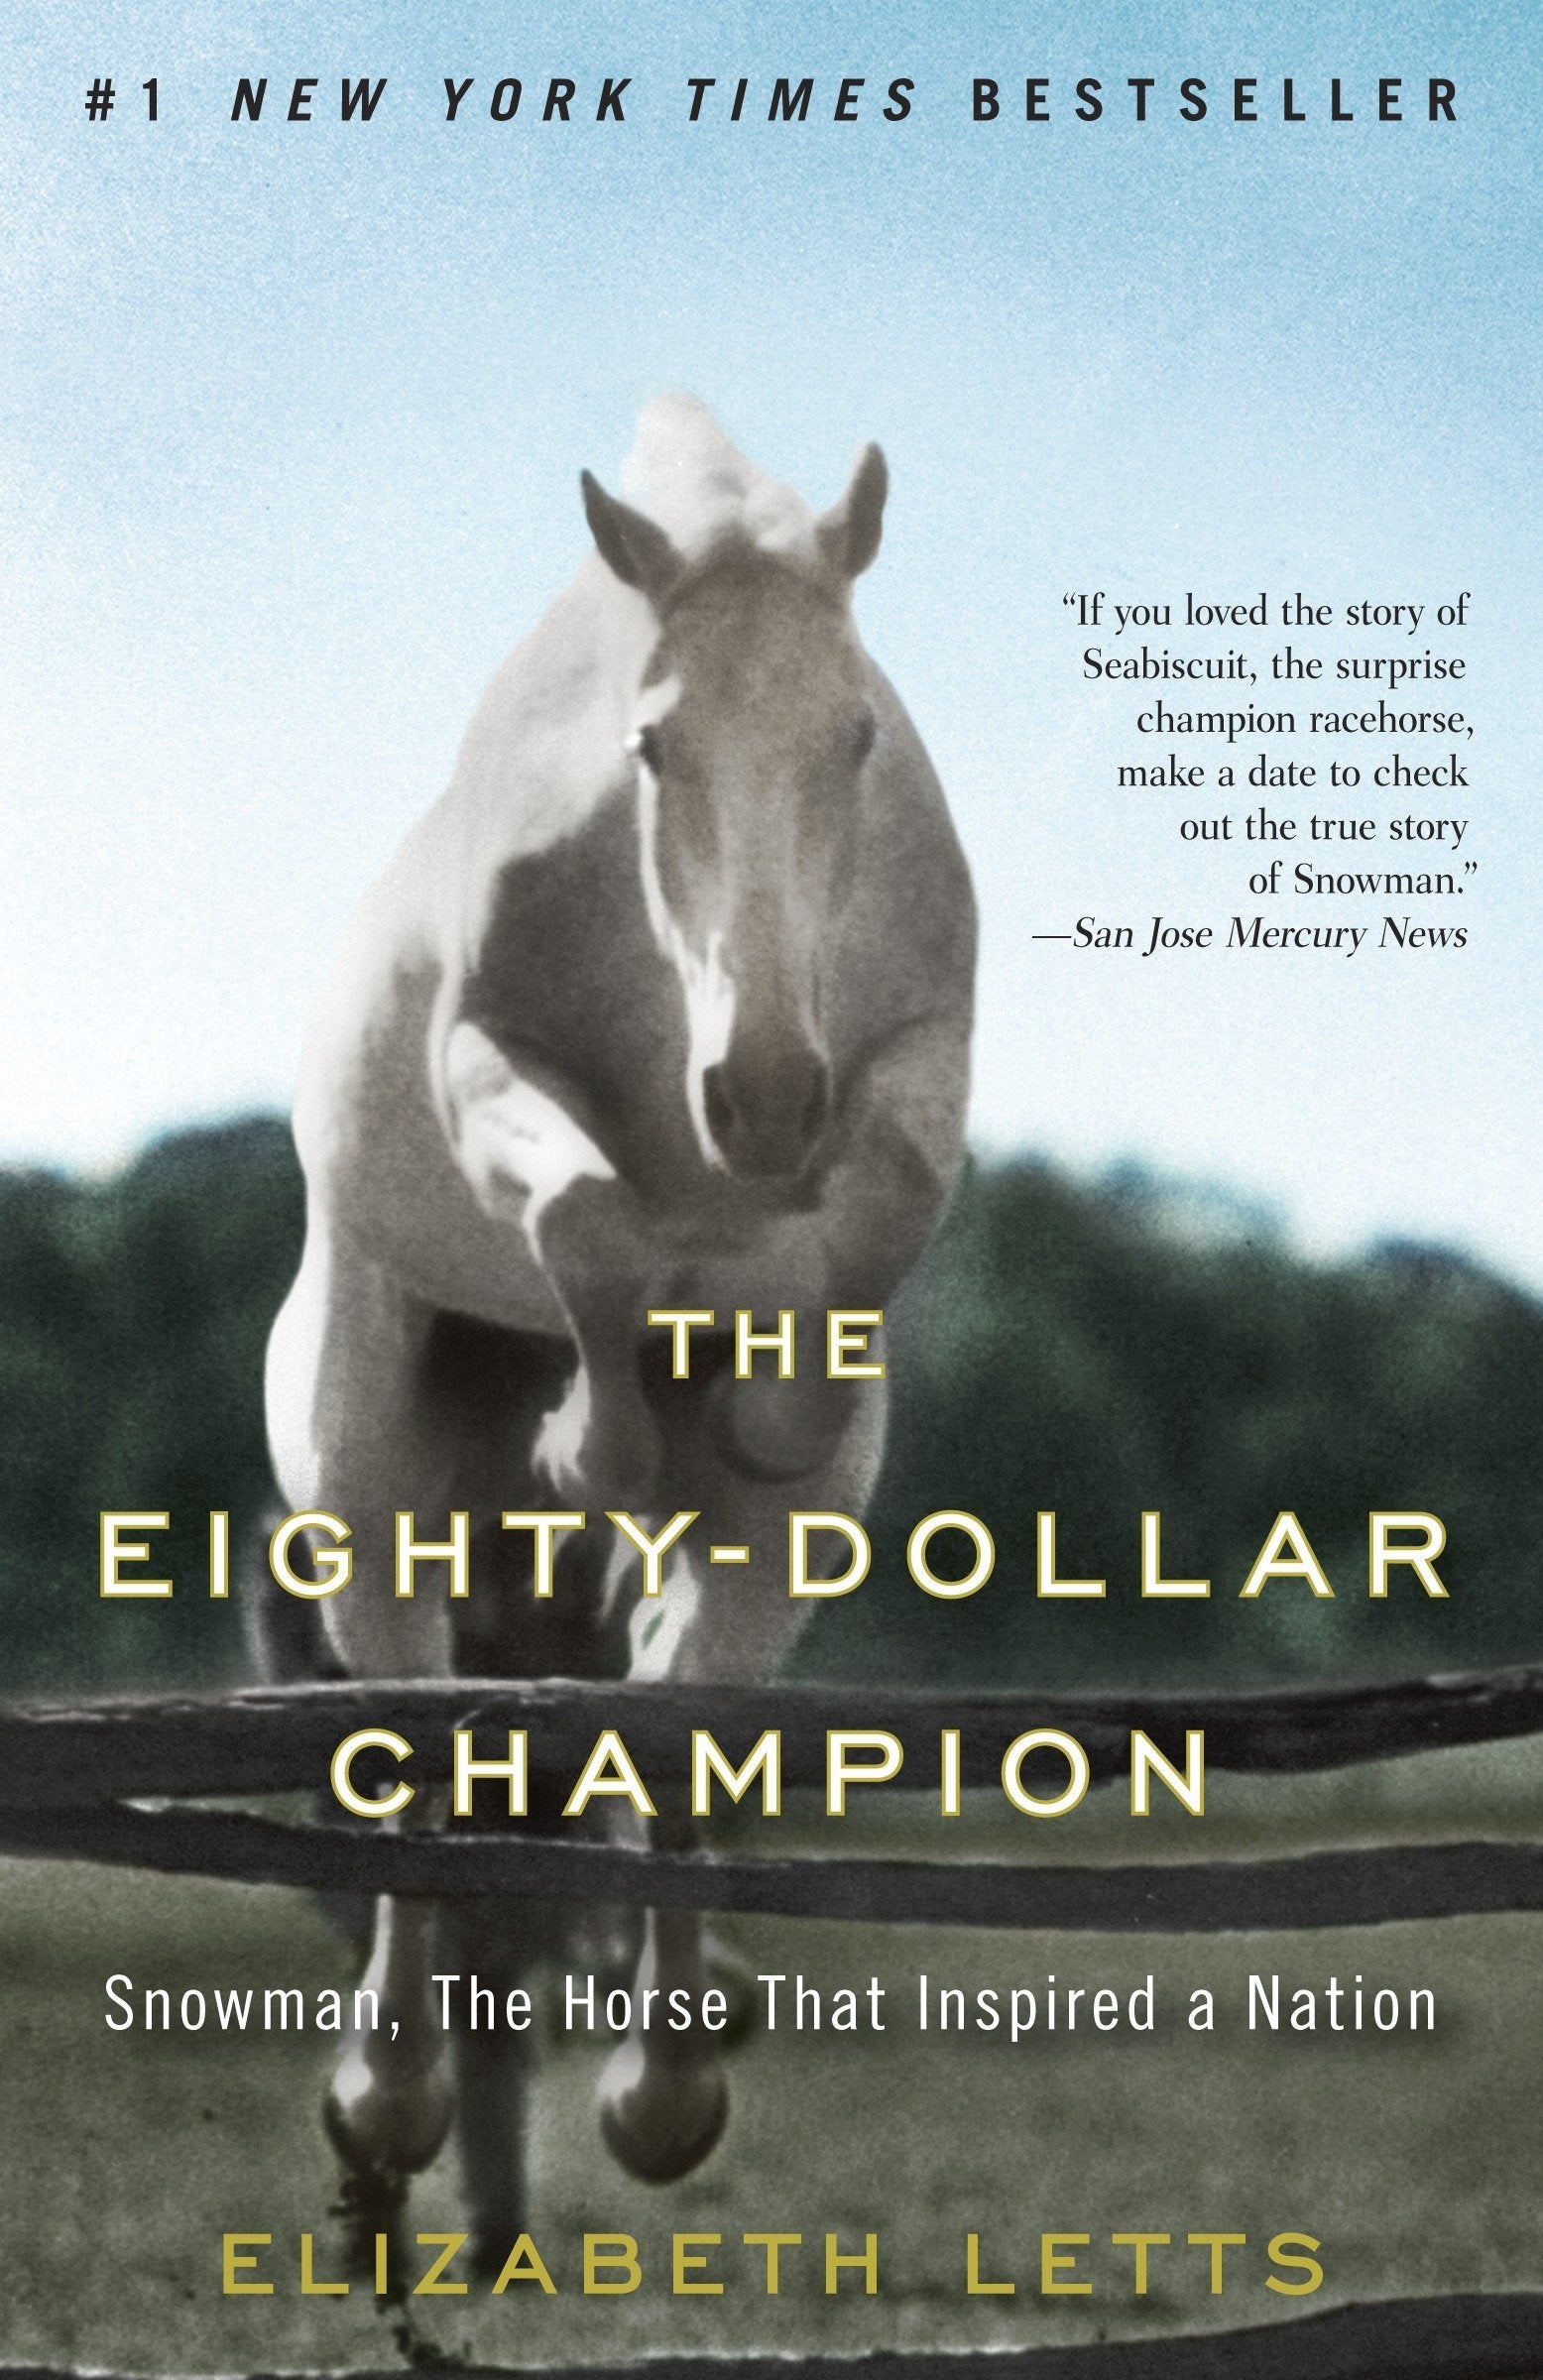 Livre ISBN 0345521099 The Eighty-Dollar Champion: Snowman, The Horse That Inspired a Nation (Elizabeth Letts)